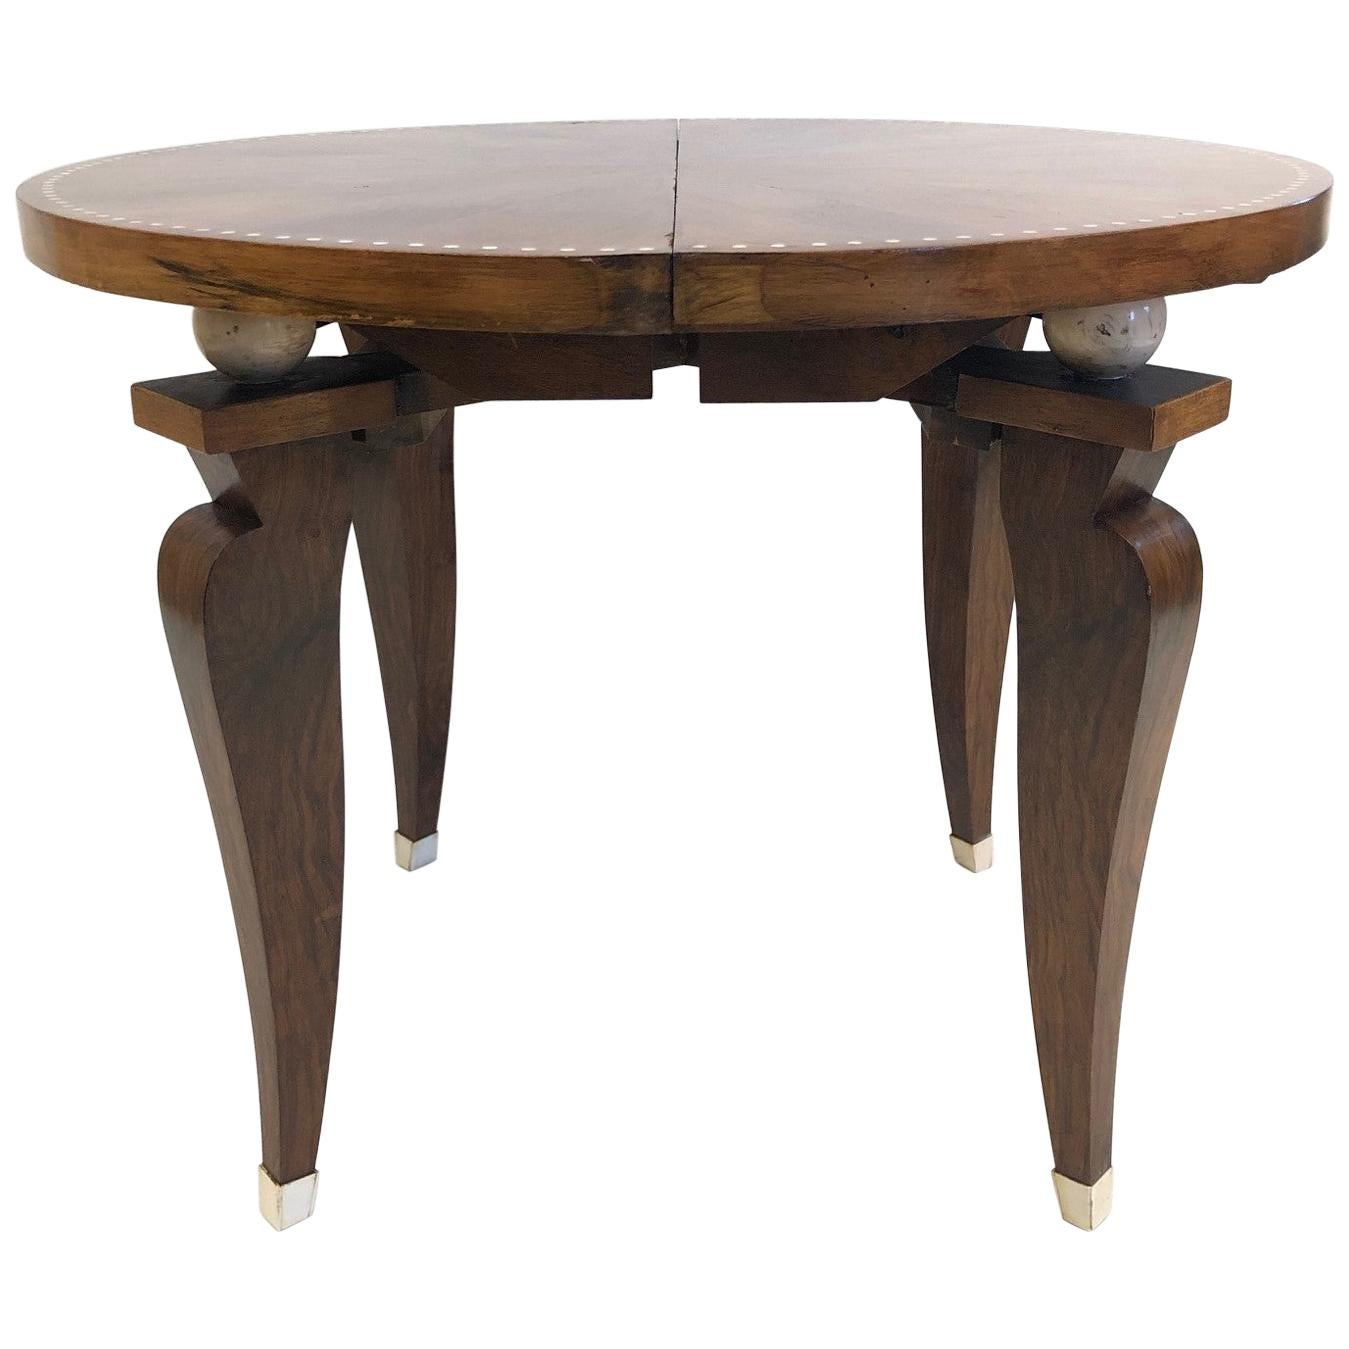 1930s French Art Deco Adjustable Table